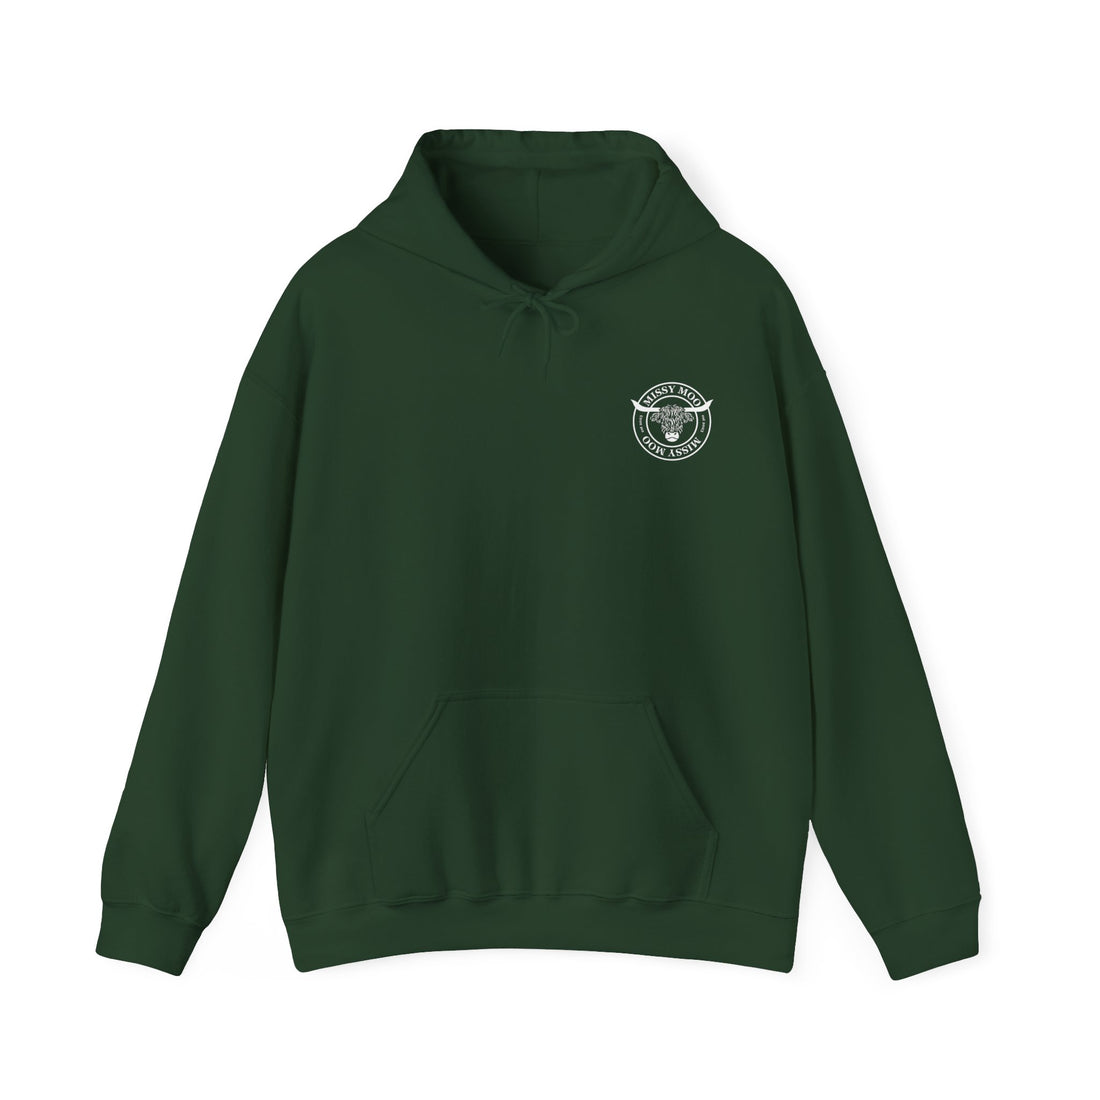 Classic Mens Hoodie - Forest Green